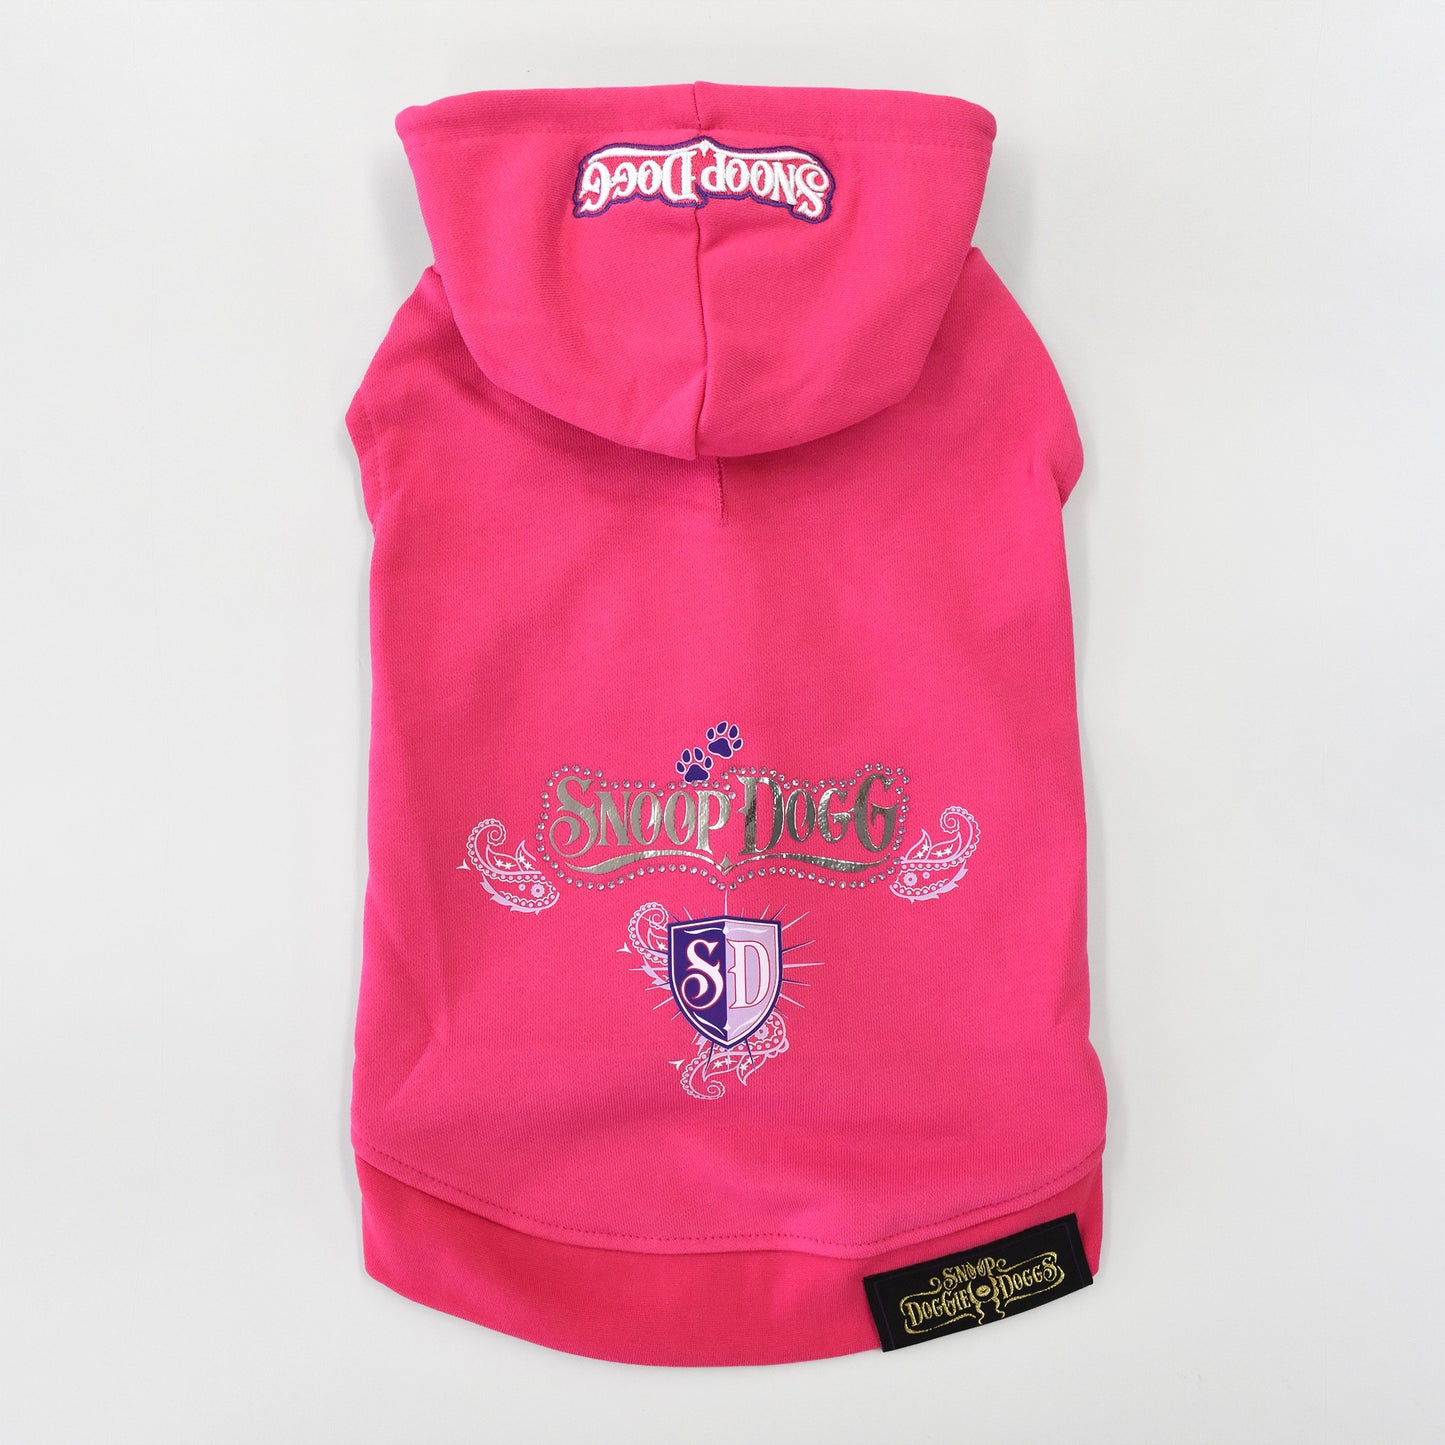 Product flat lay of the Boss Lady Deluxe Pet Hoodie.